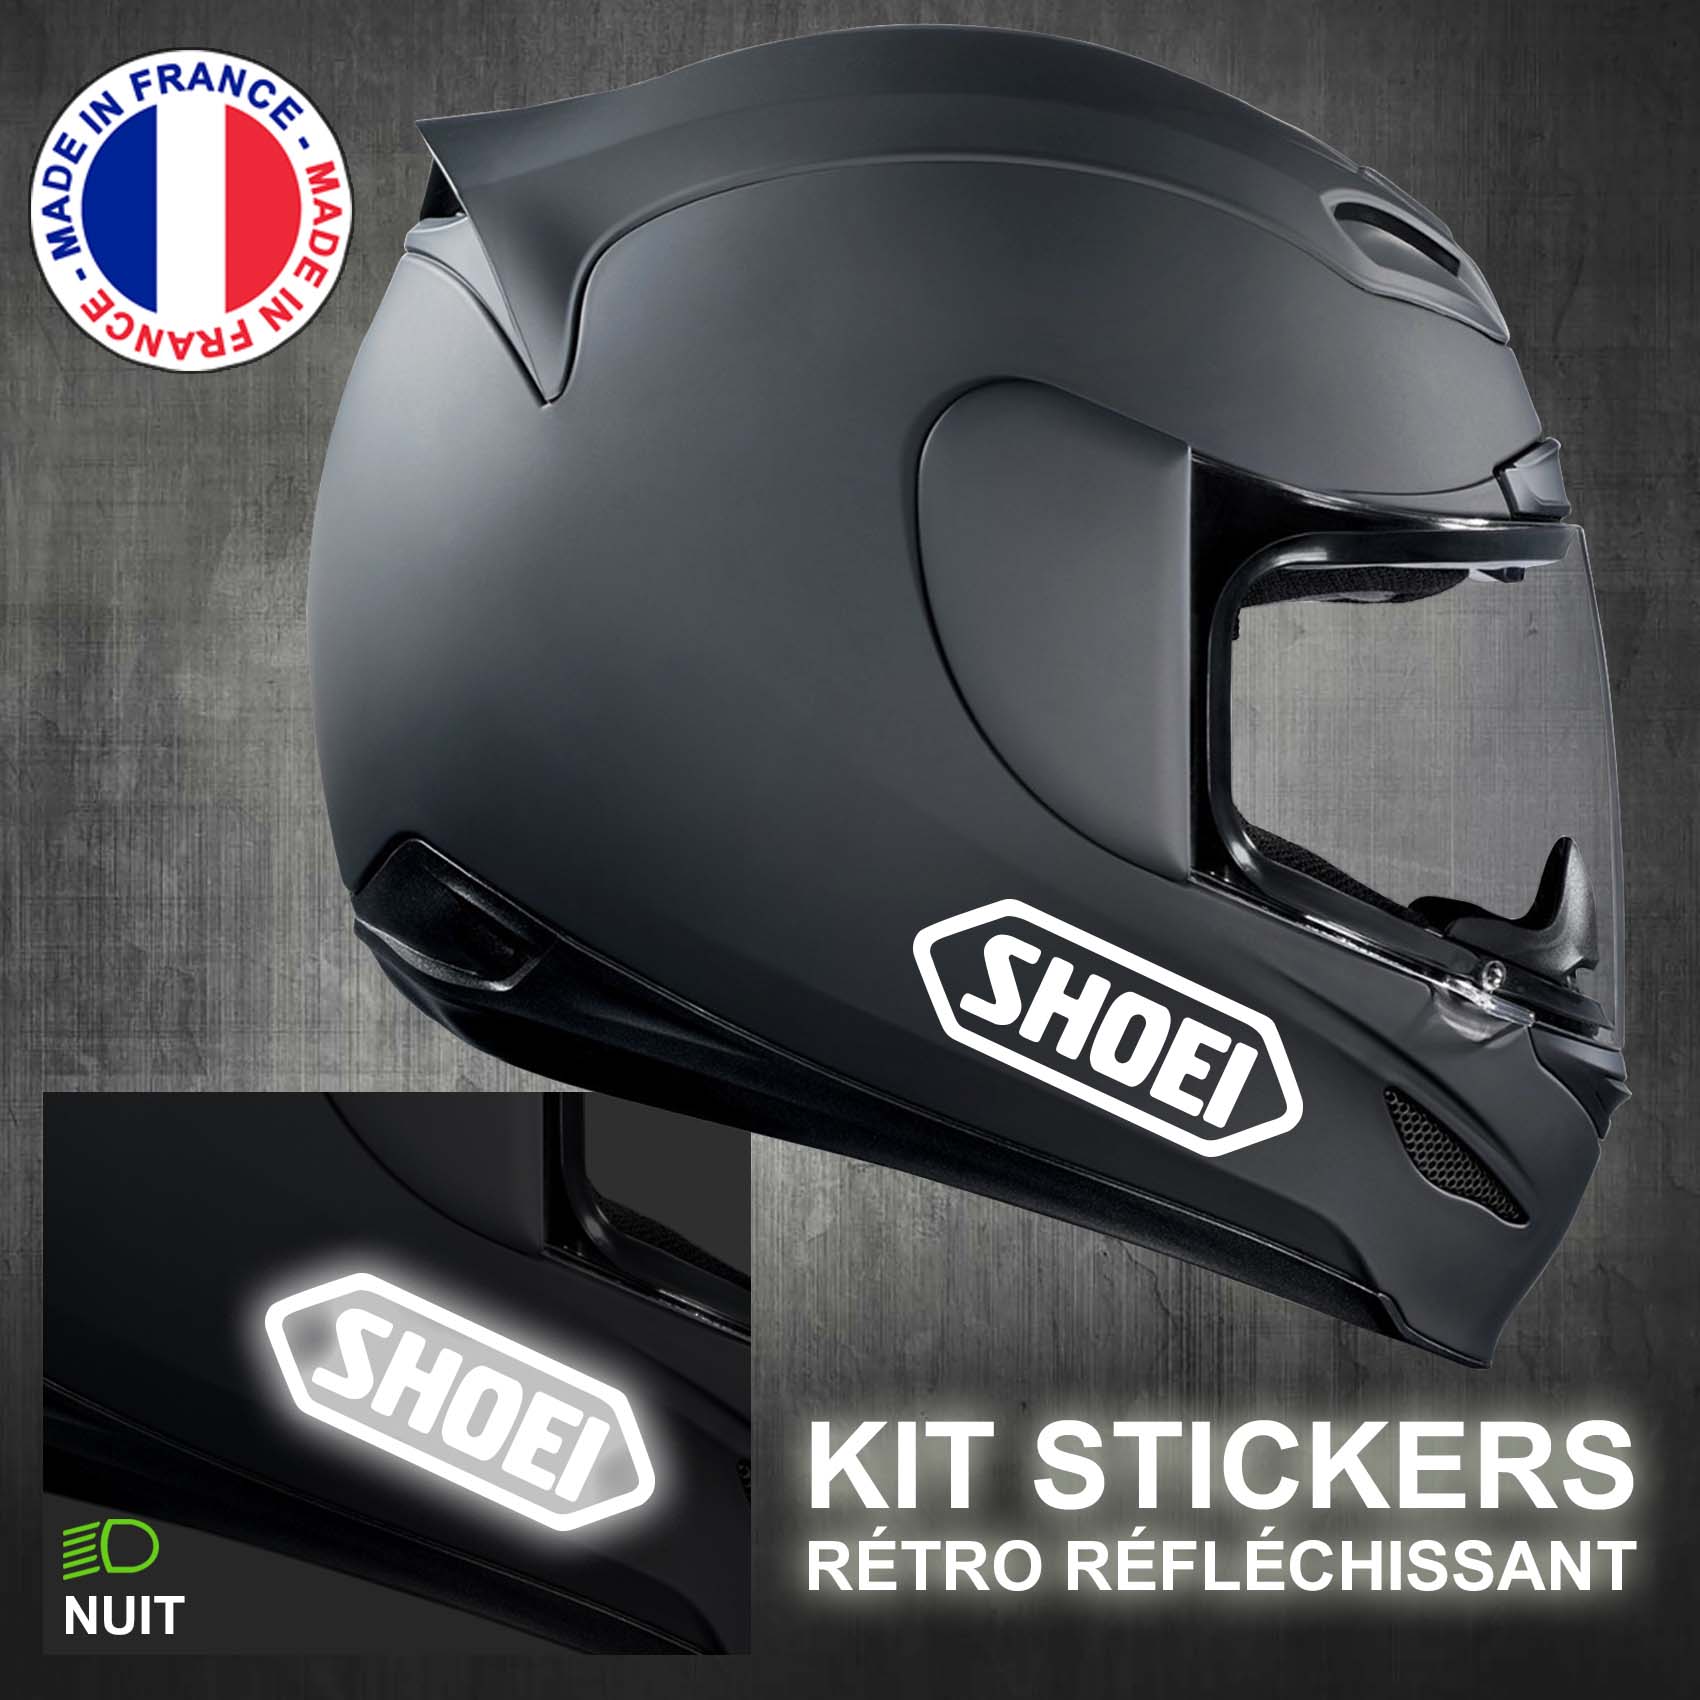 stickers-casque-moto-shoei-ref1-retro-reflechissant-autocollant-noir-moto-velo-tuning-racing-route-sticker-casques-adhesif-scooter-nuit-securite-decals-personnalise-personnalisable-min